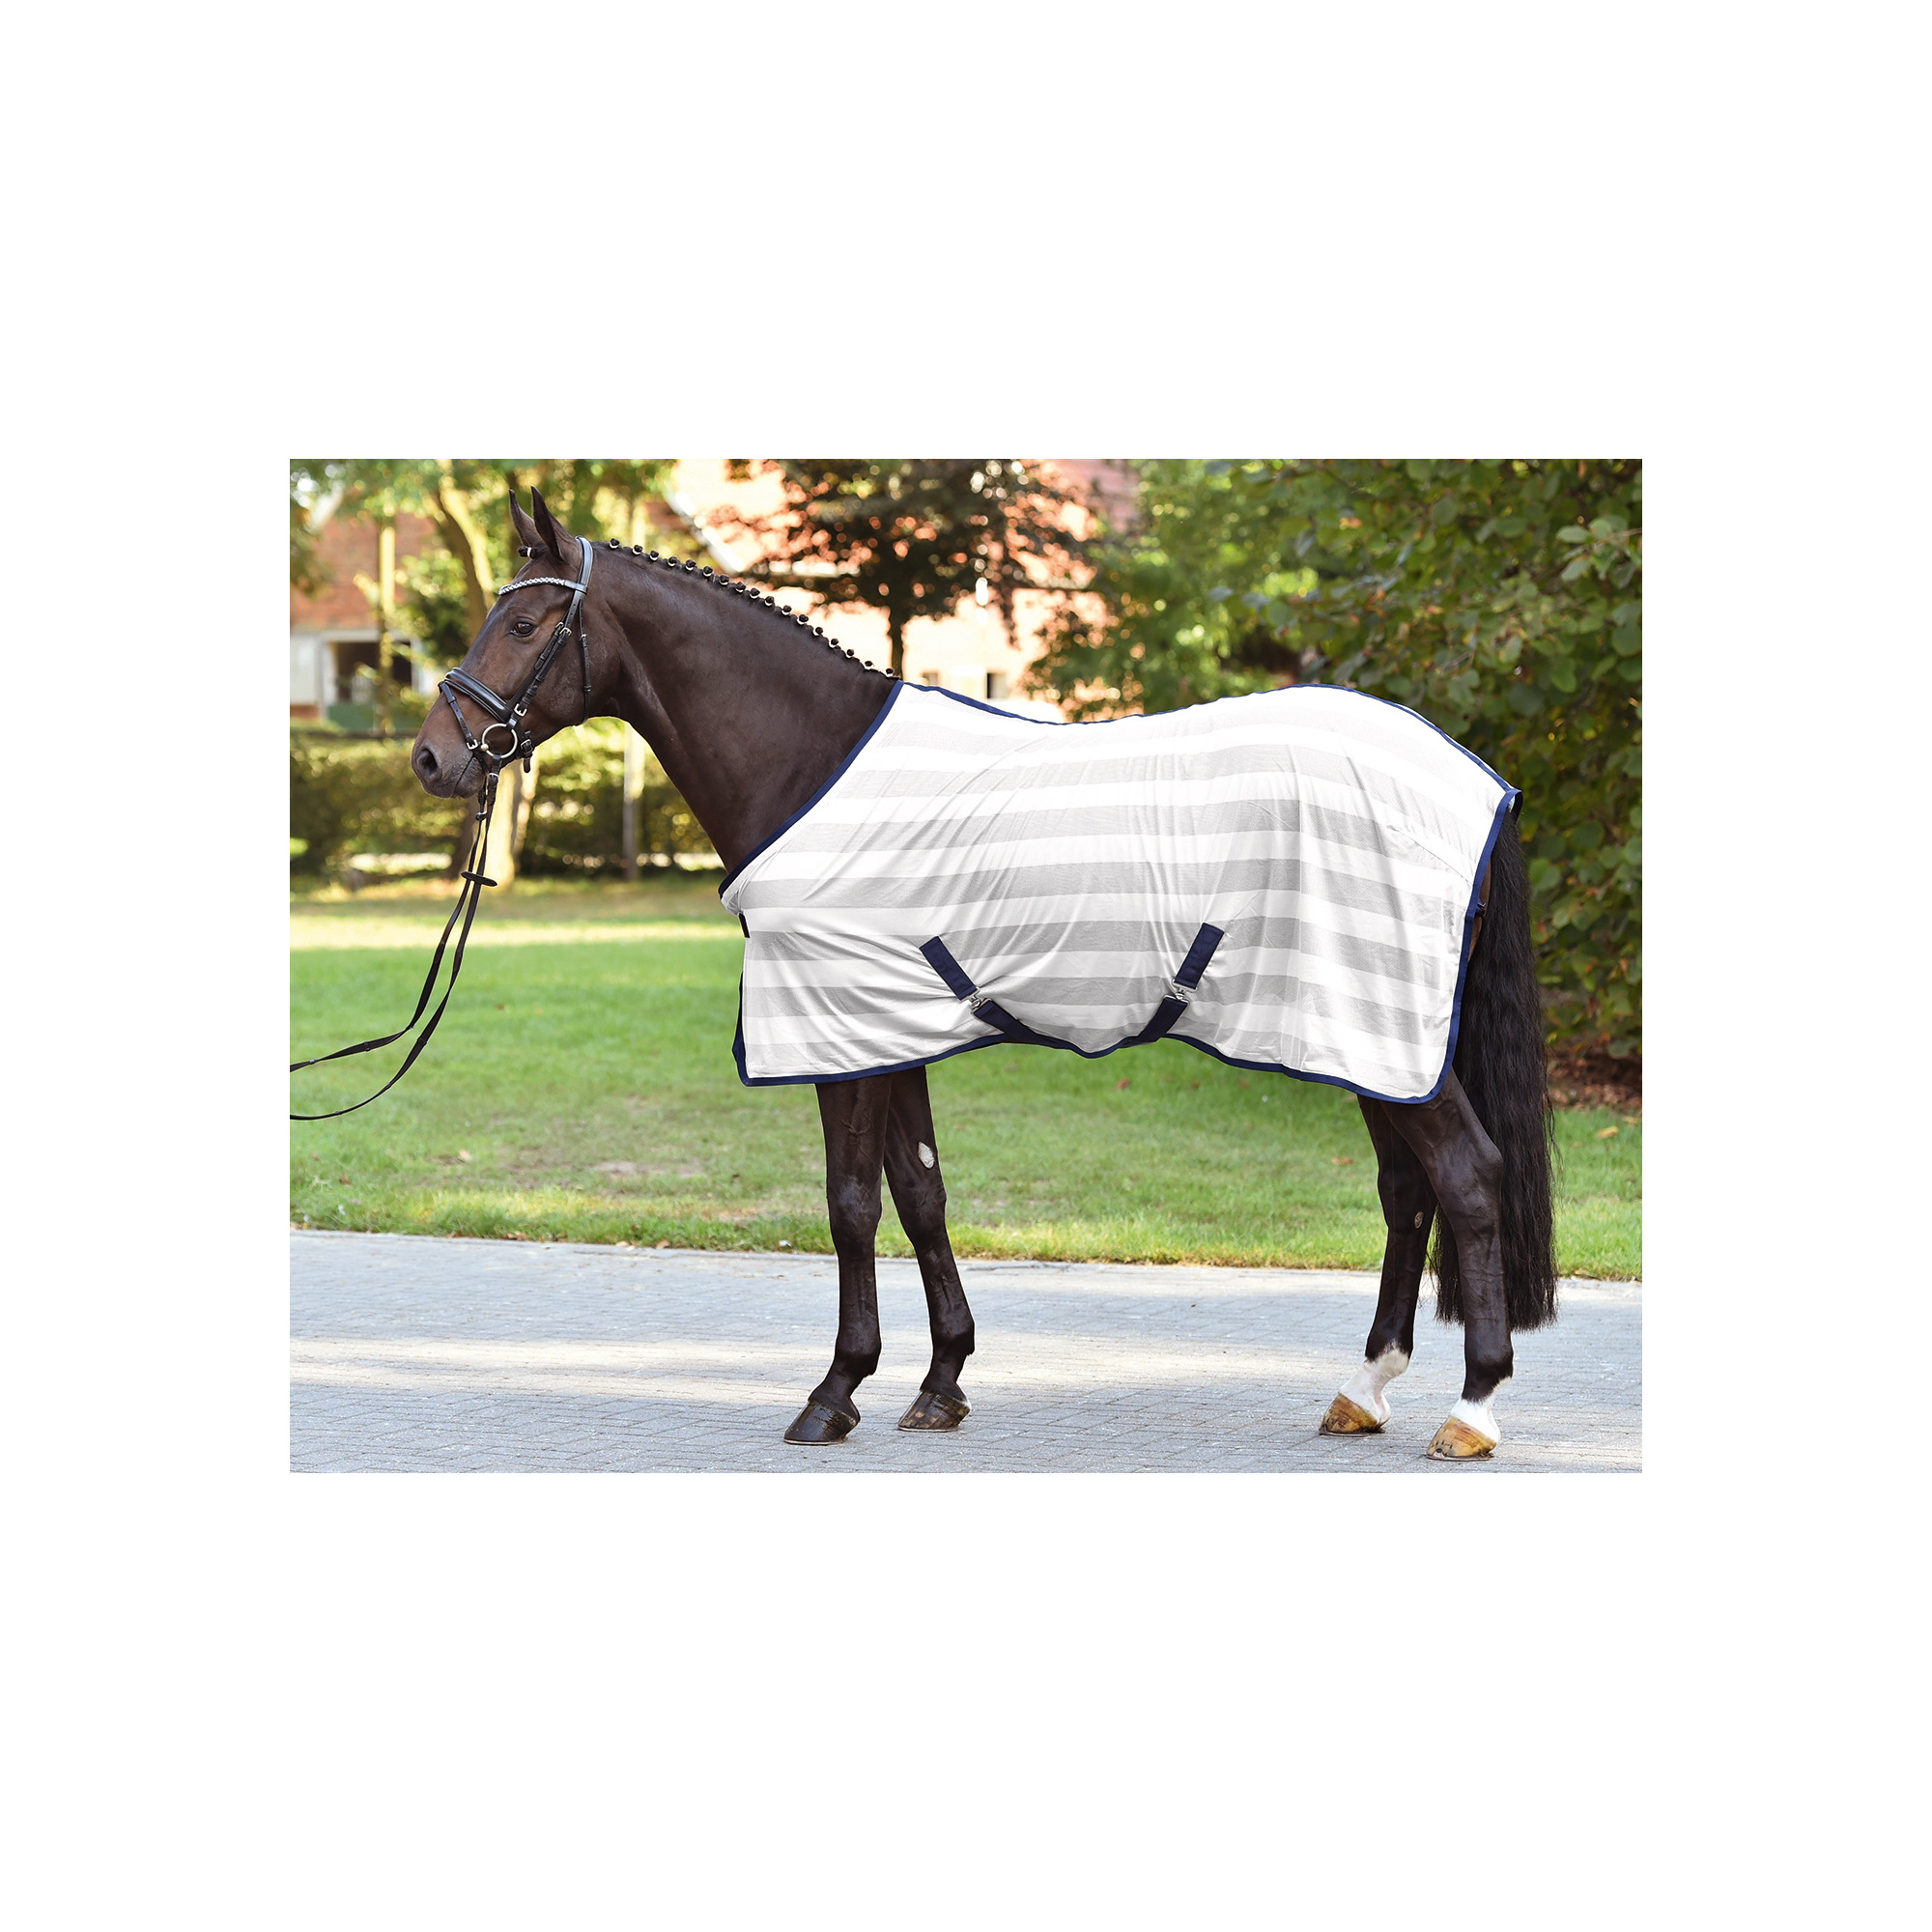 Busse Stripe Transport Rug Equi, How To Stop Horse Rug Slipping